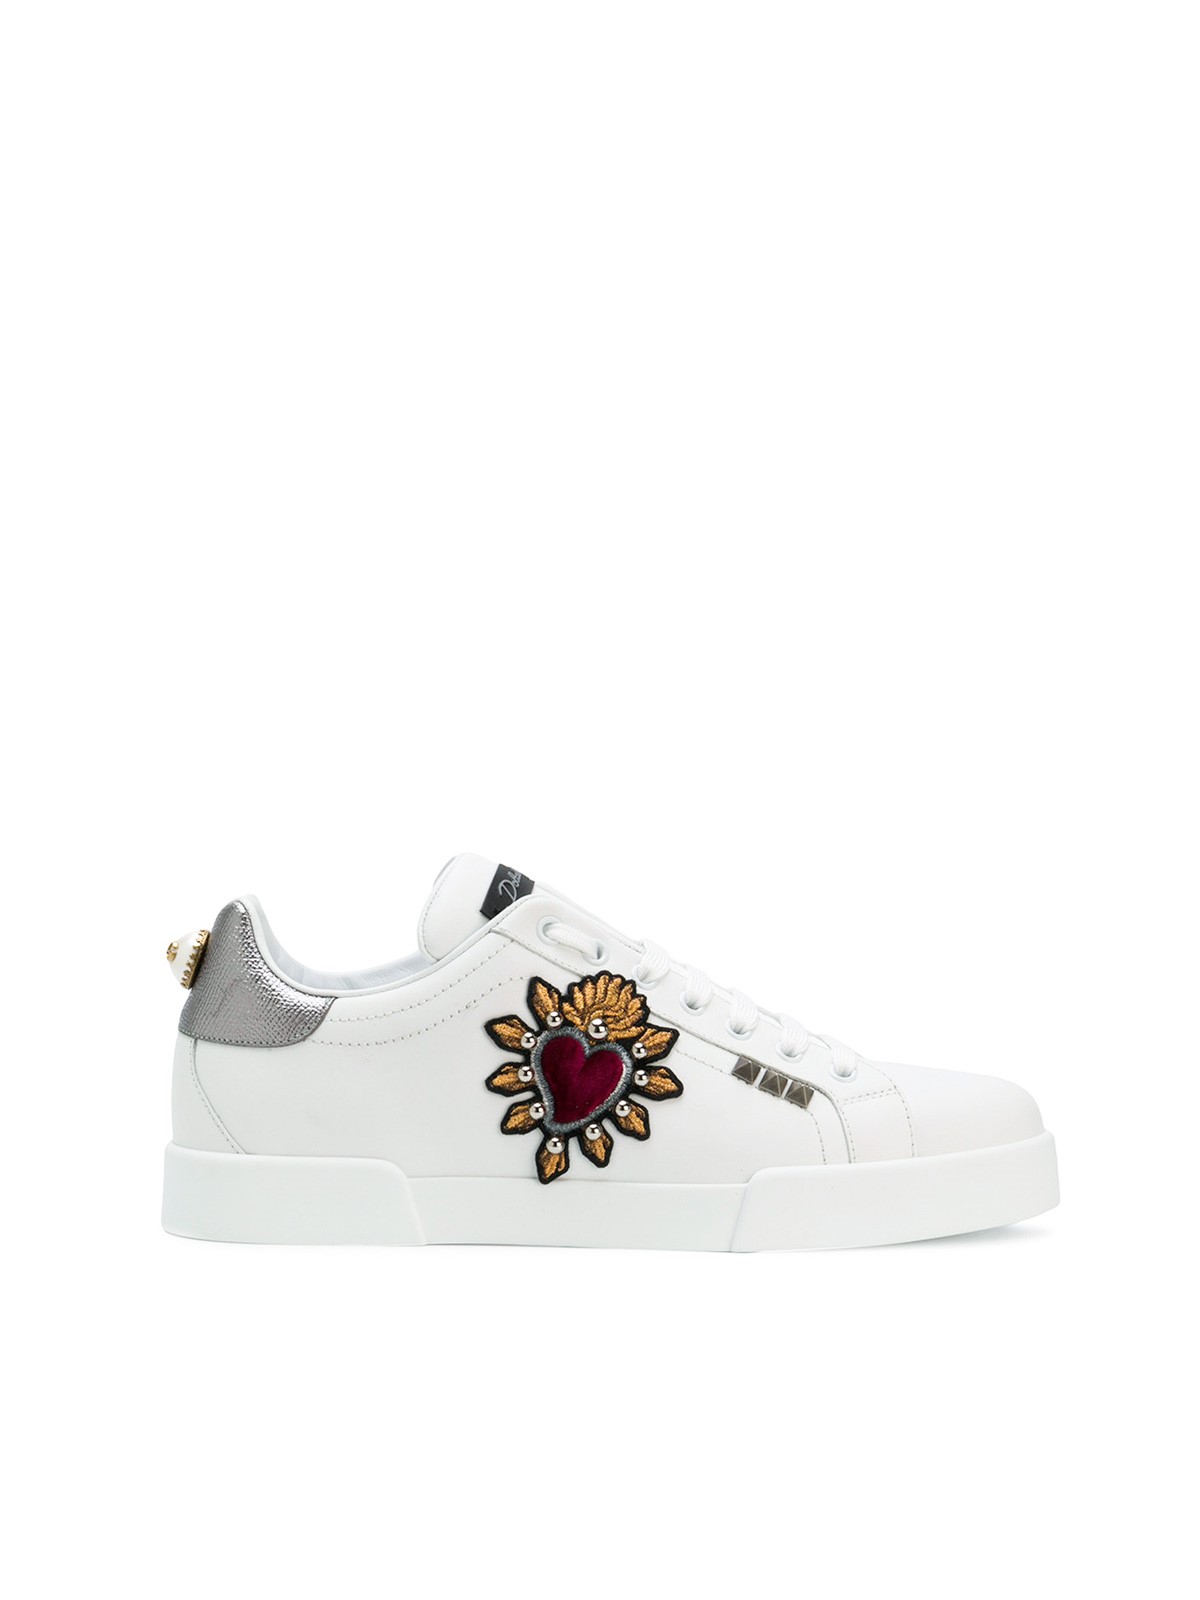 dolce and gabbana heart shoes